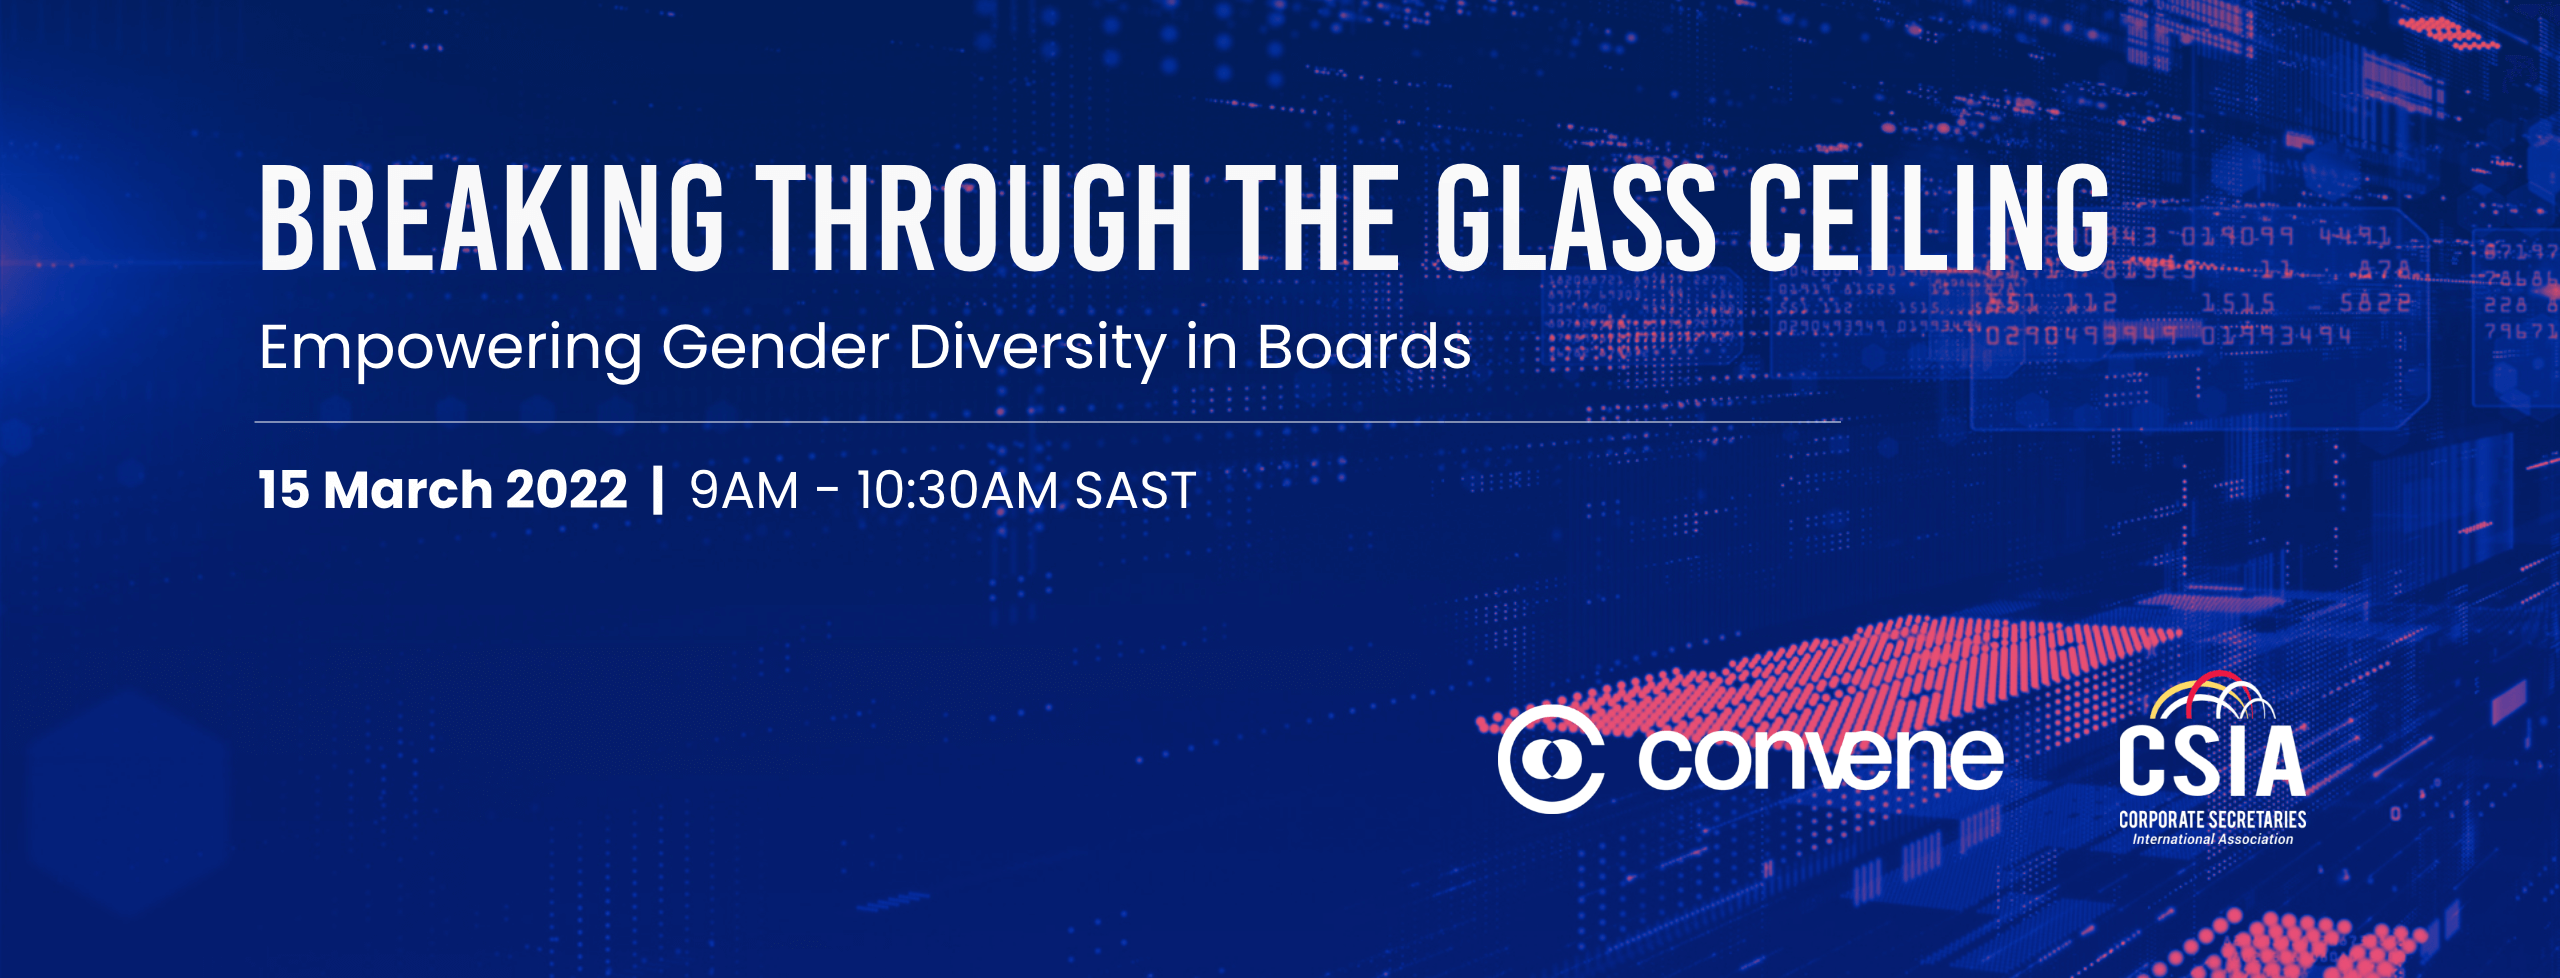 Breaking through the Glass Ceiling: Empowering Gender Diversity in Boards